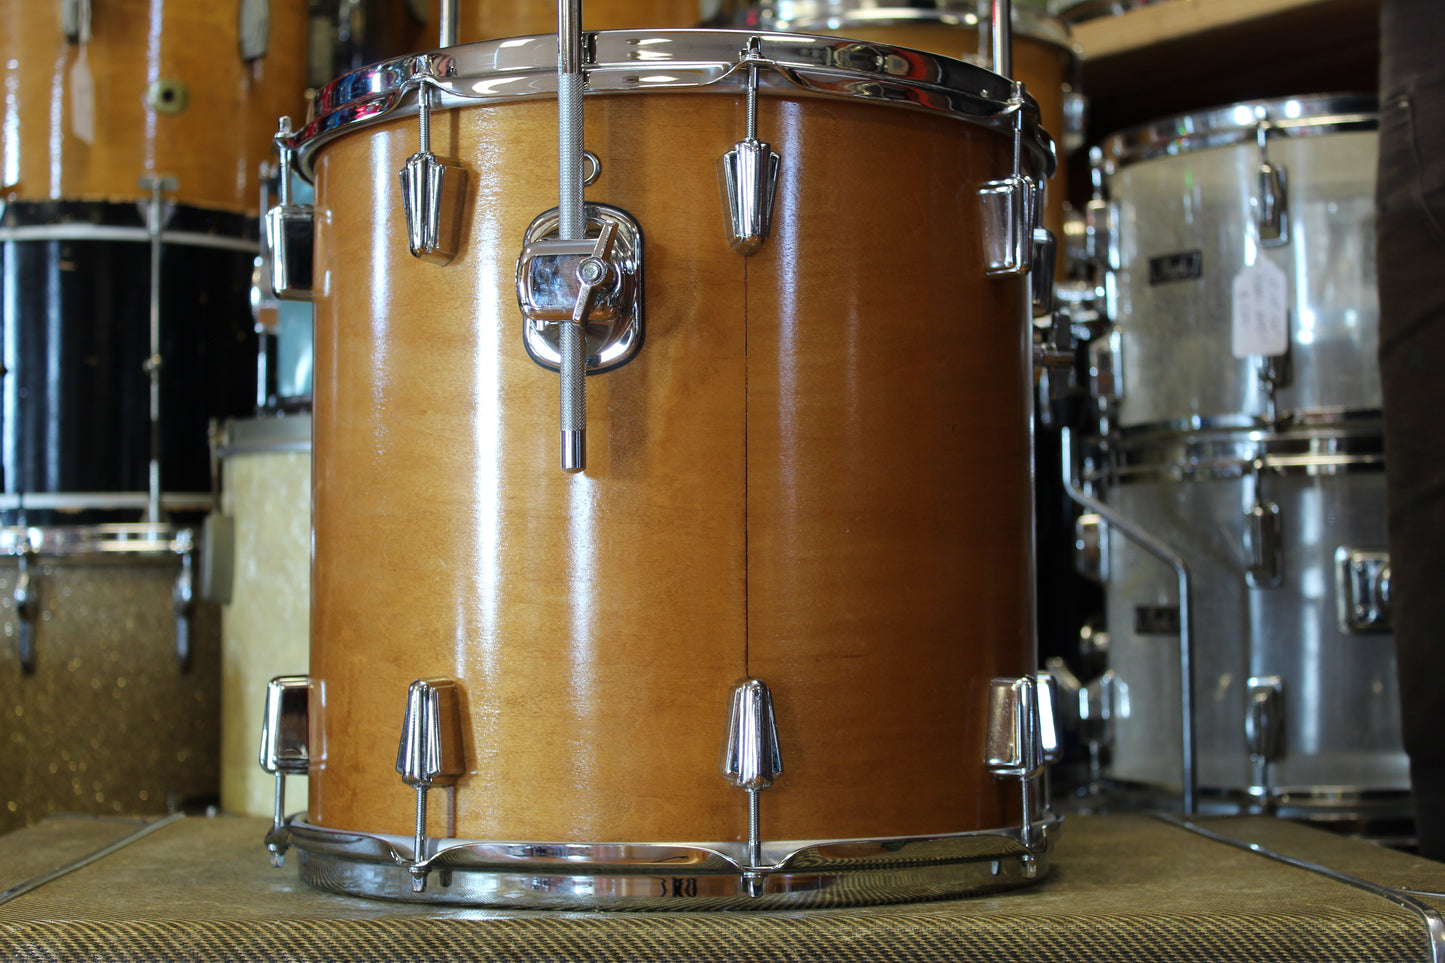 C&C Player Date II Drum kit in Aged Maple 12x20 14x14 8x12